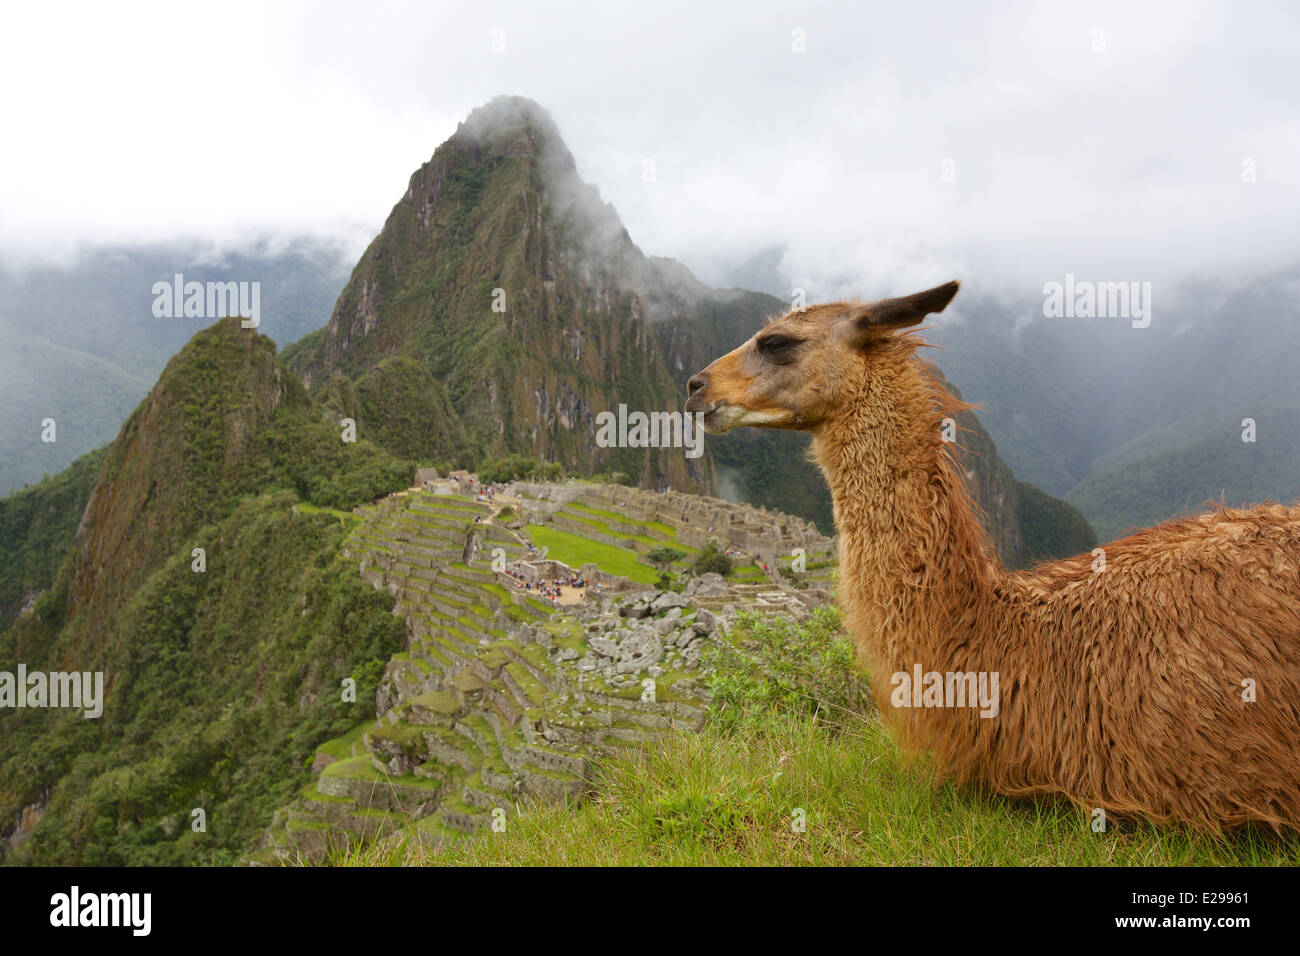 Beautiful and mysterious Machu Picchu, the lost city of the Incas, in the Peruvian Andes, at sunrise. Stock Photo